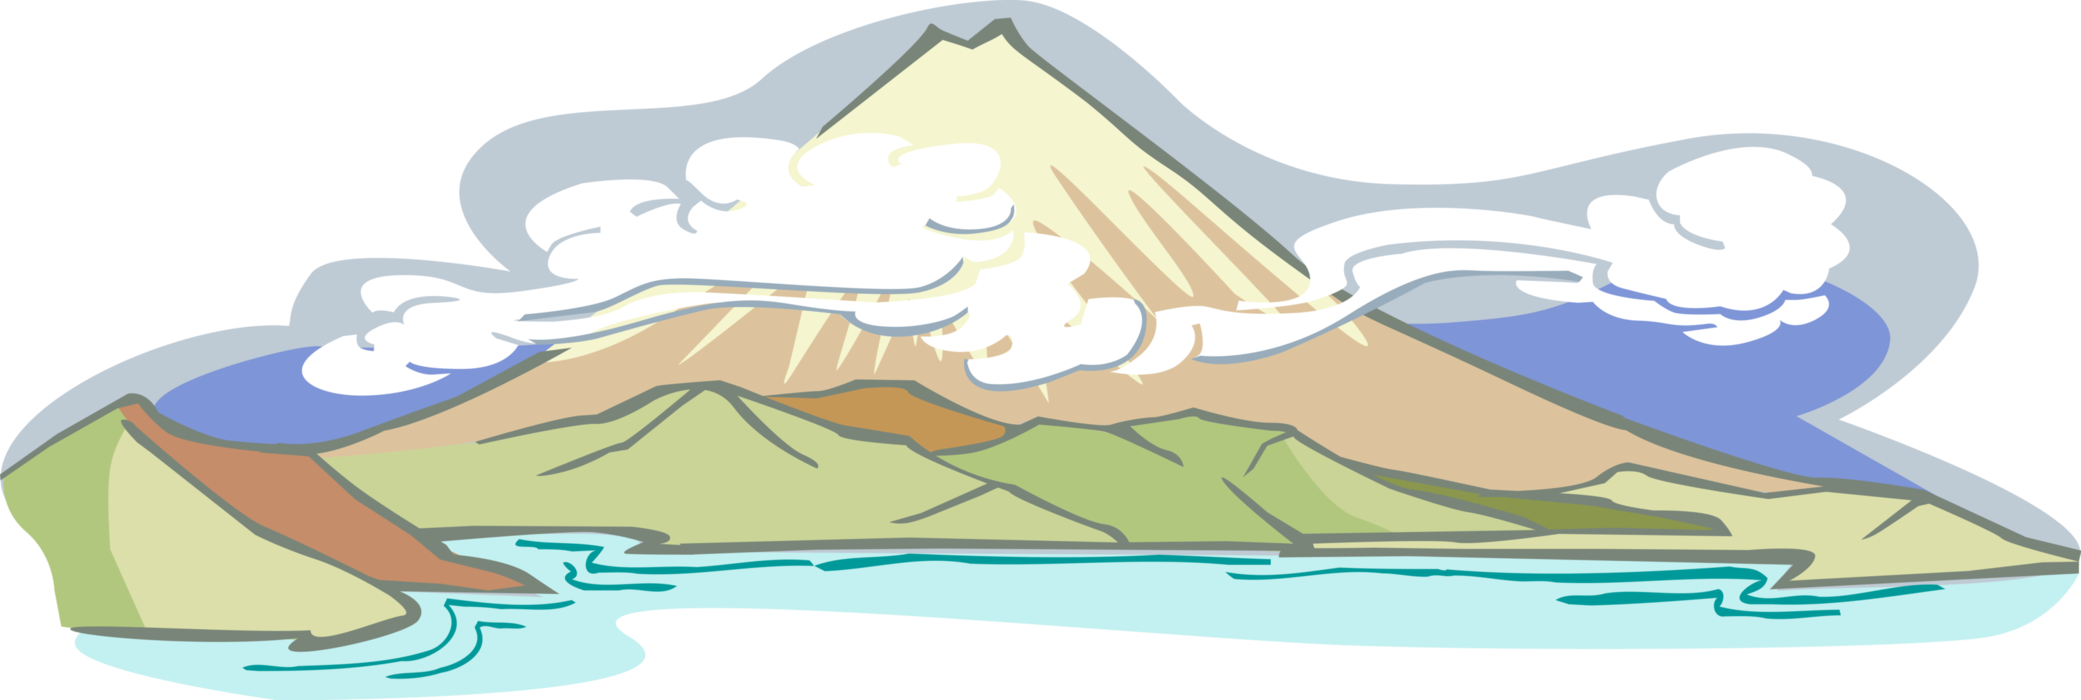 Vector Illustration of Mountain Volcano in Mist and Clouds